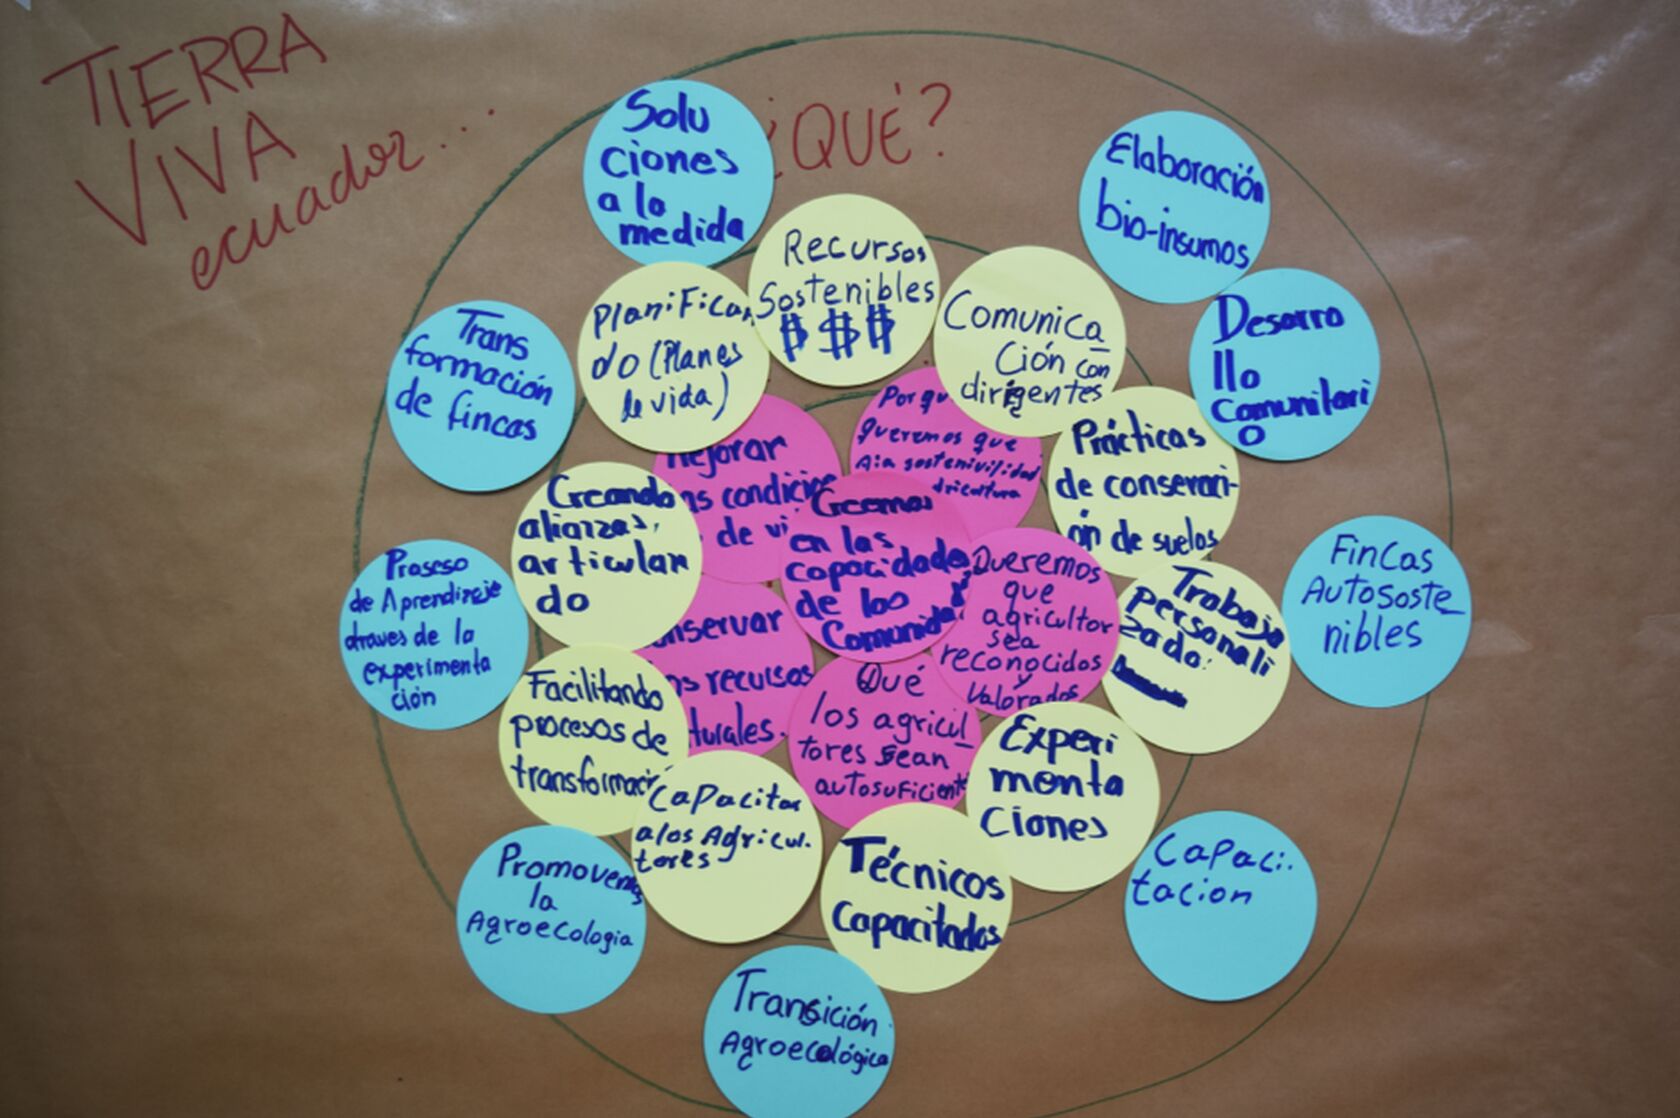 An excerpt of the participatory process the team used to articulate the core program areas for Tierra Viva